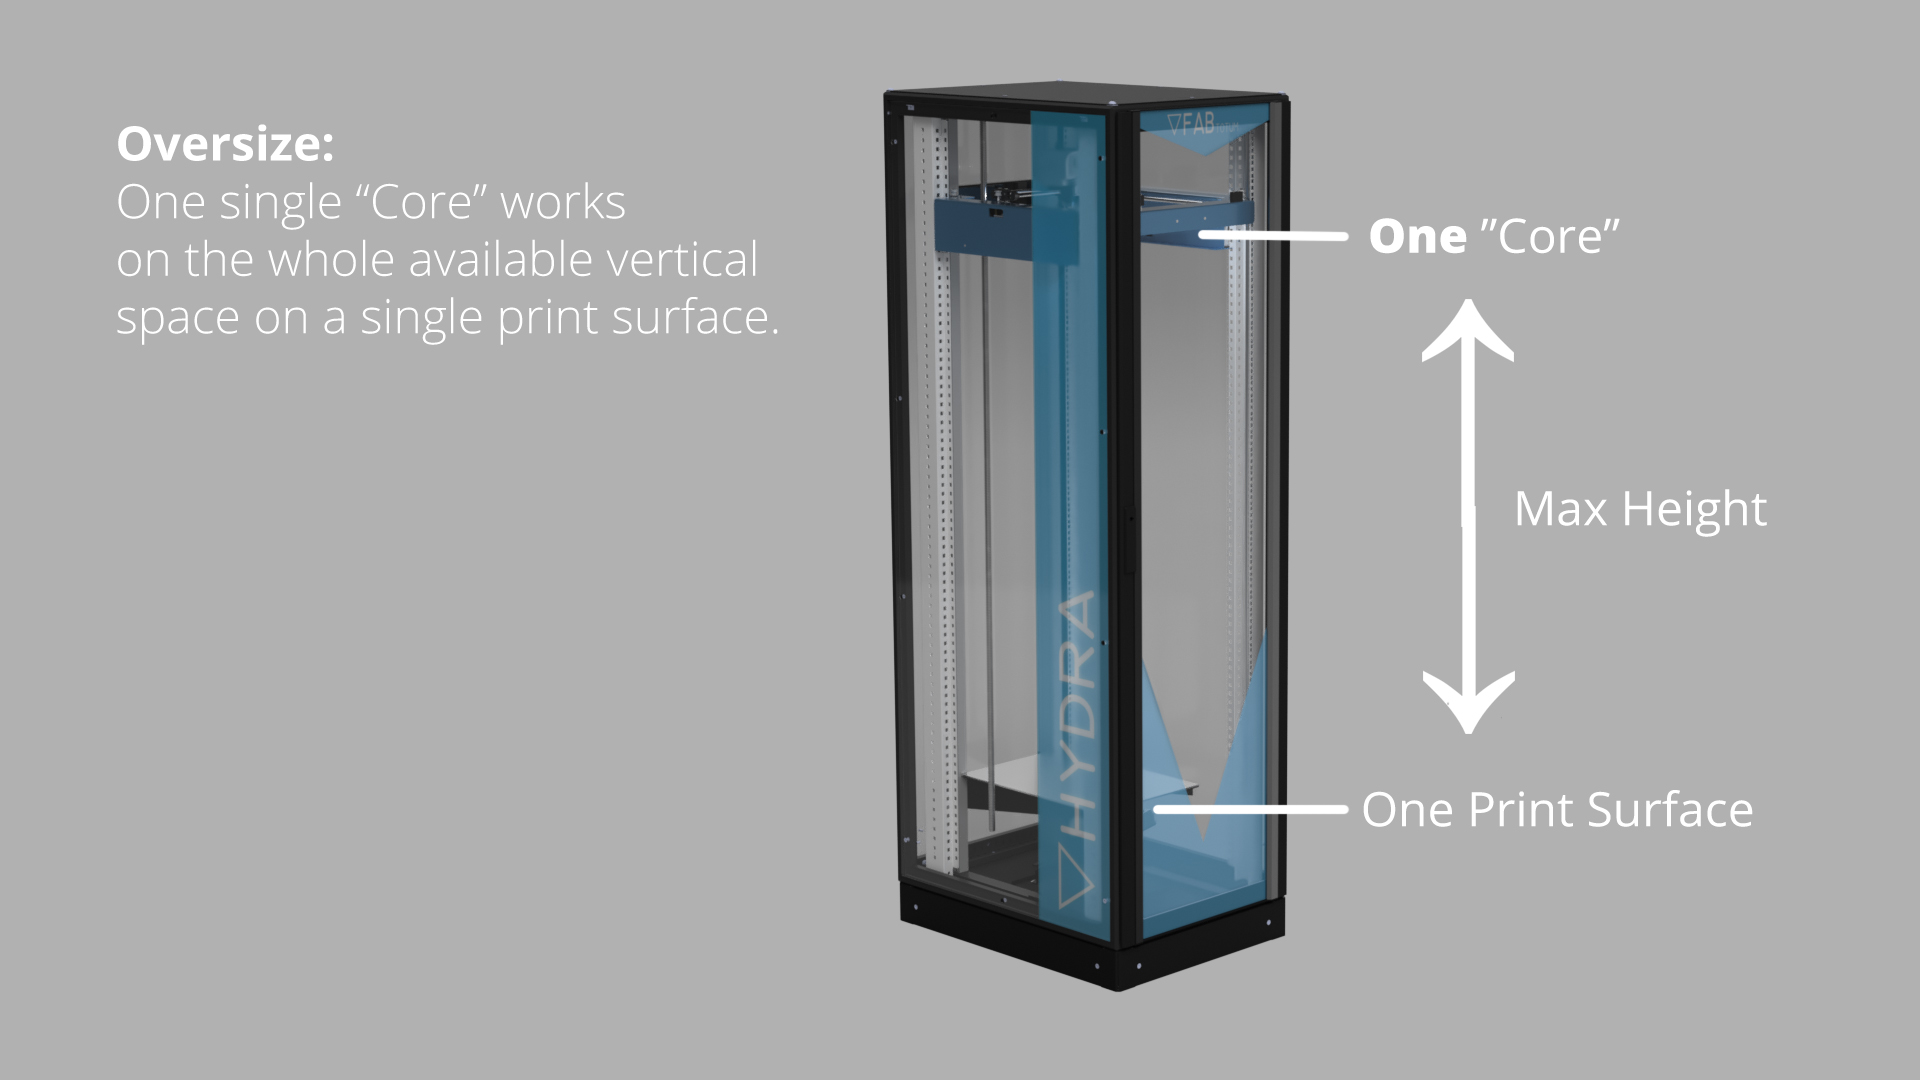 Oversize your 3D printing: one Core, one 3d print surface, max finale height